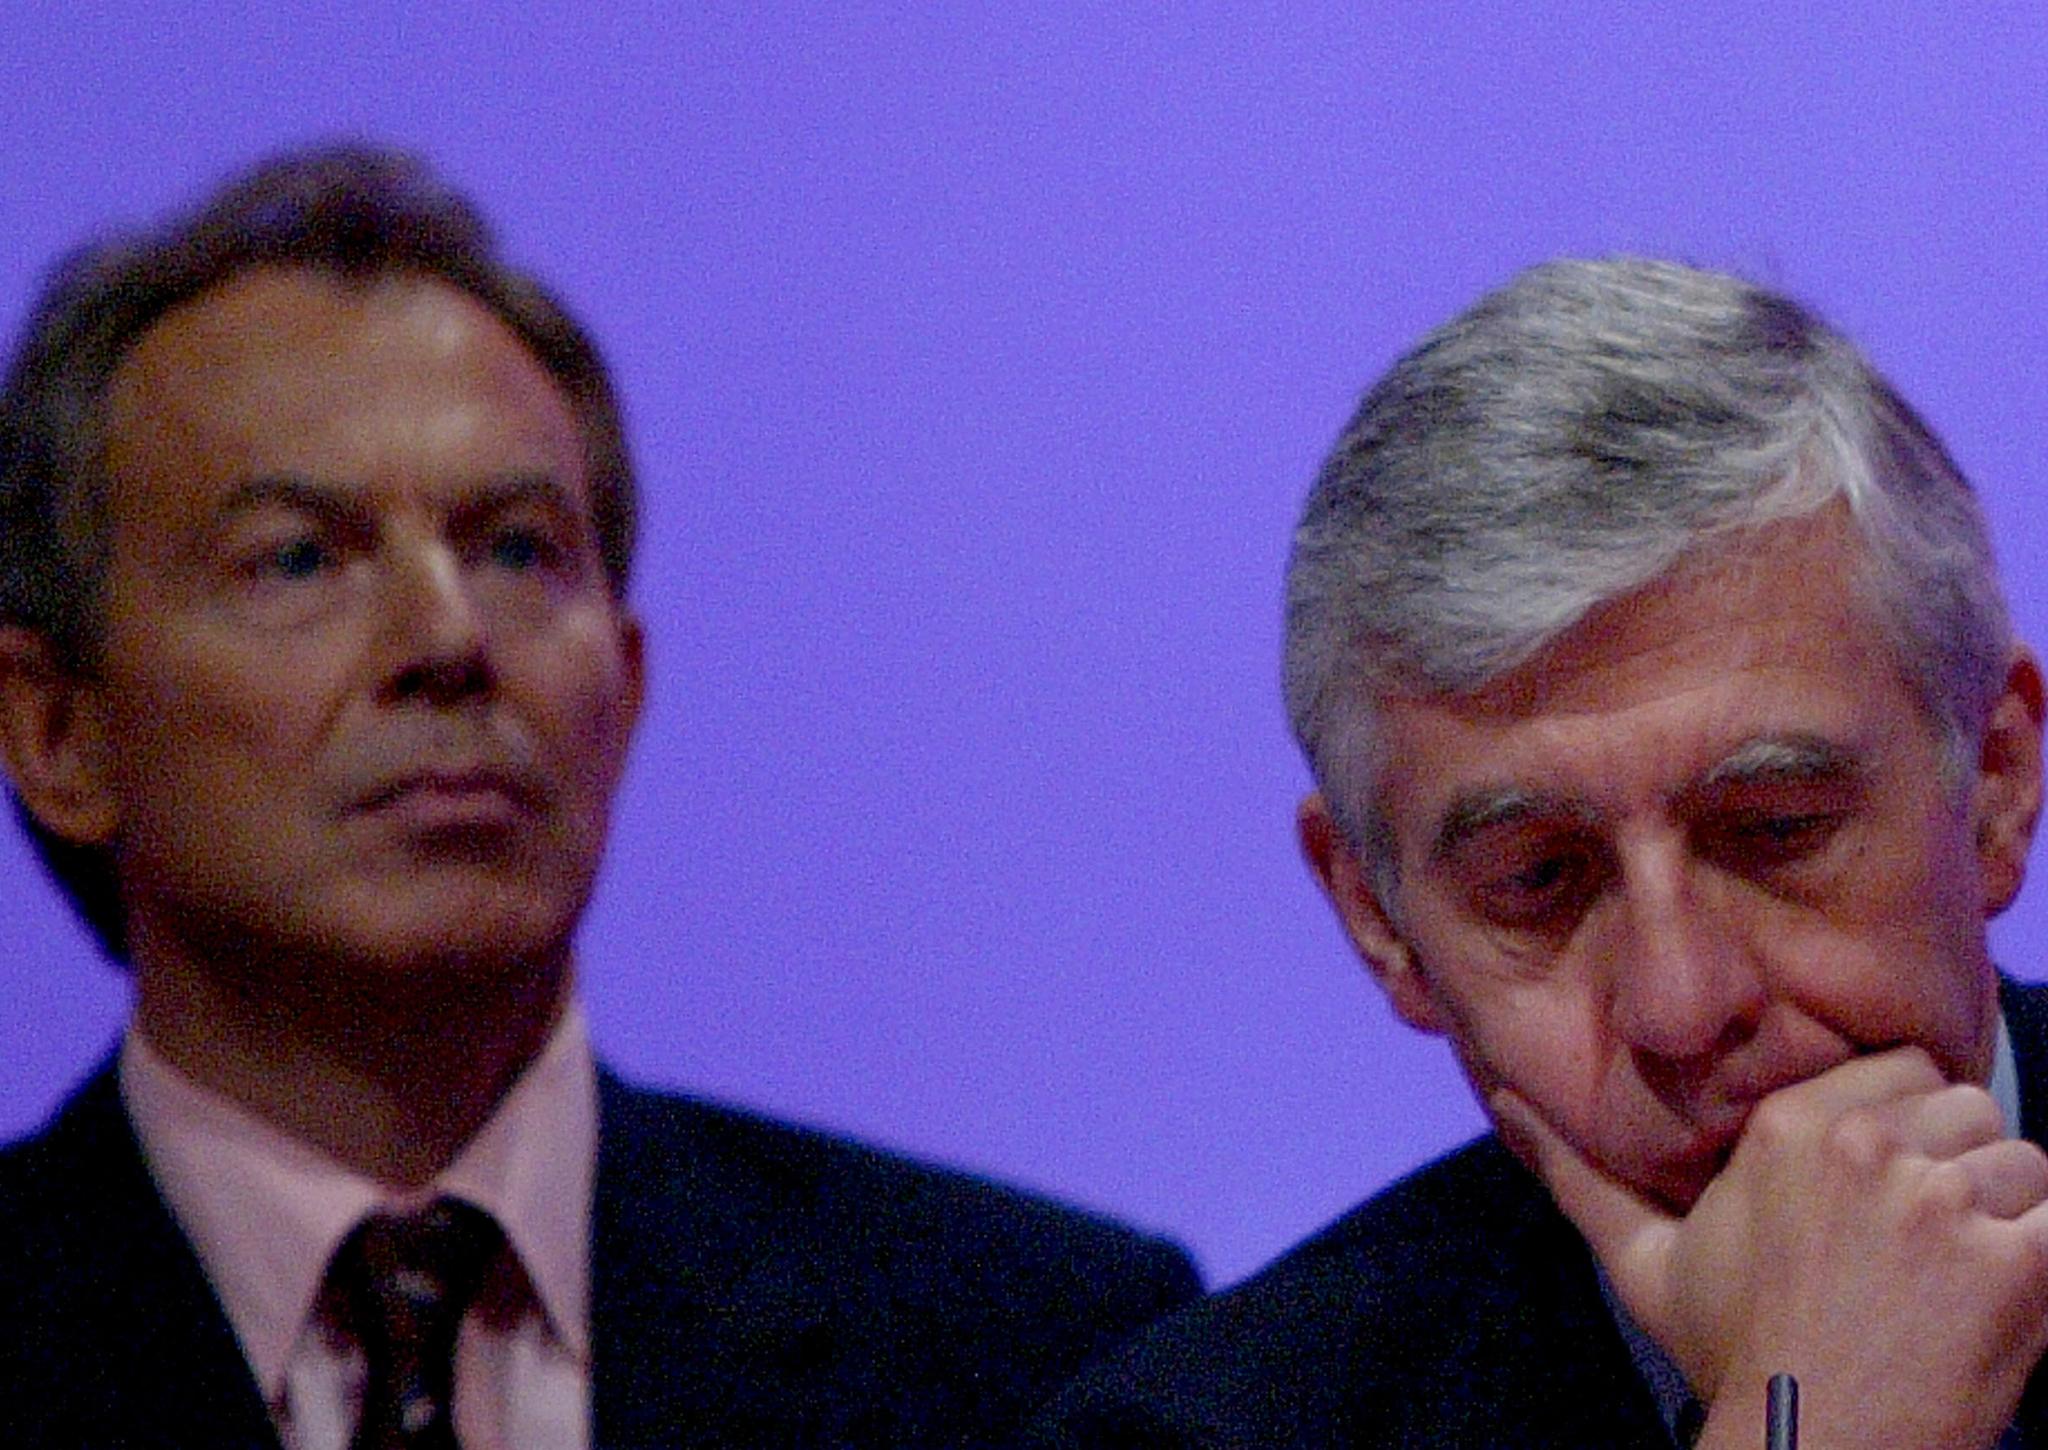 Jack Straw, Britain's Foreign Secretary, is seen next to Britain's Prime Minister Tony Blair during the fifth and final day of the Labour Party Annual Conference on September 30, 2004 in Brighton